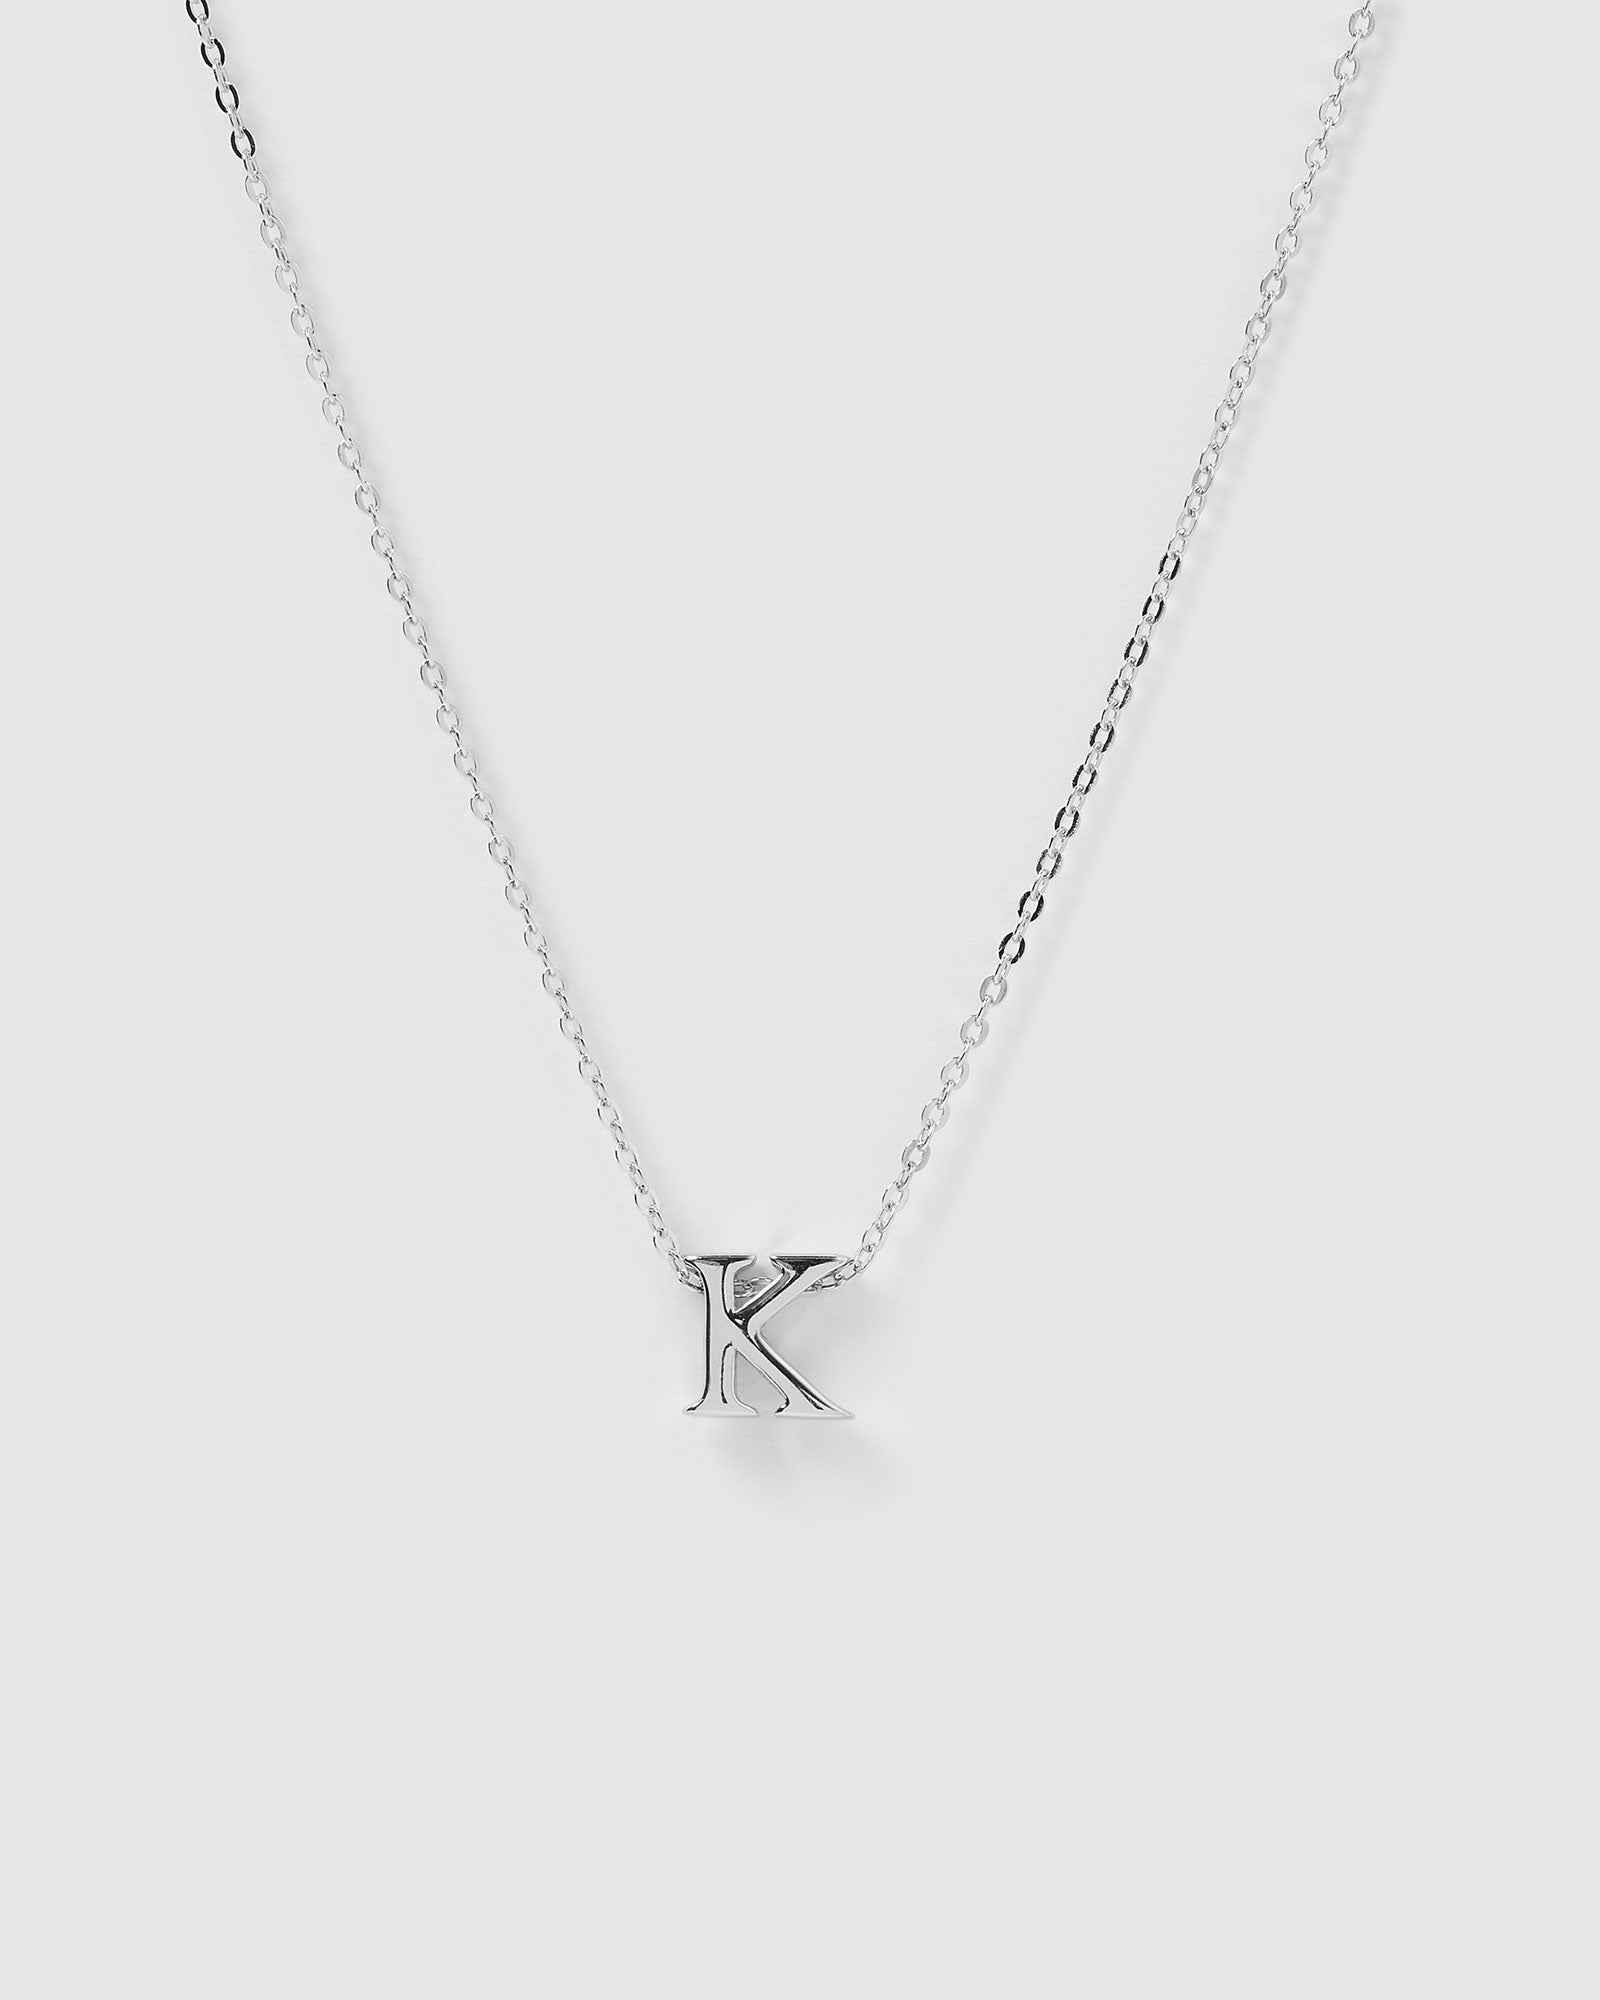 Children's Initials on Real Silver Necklace | Charming Engraving